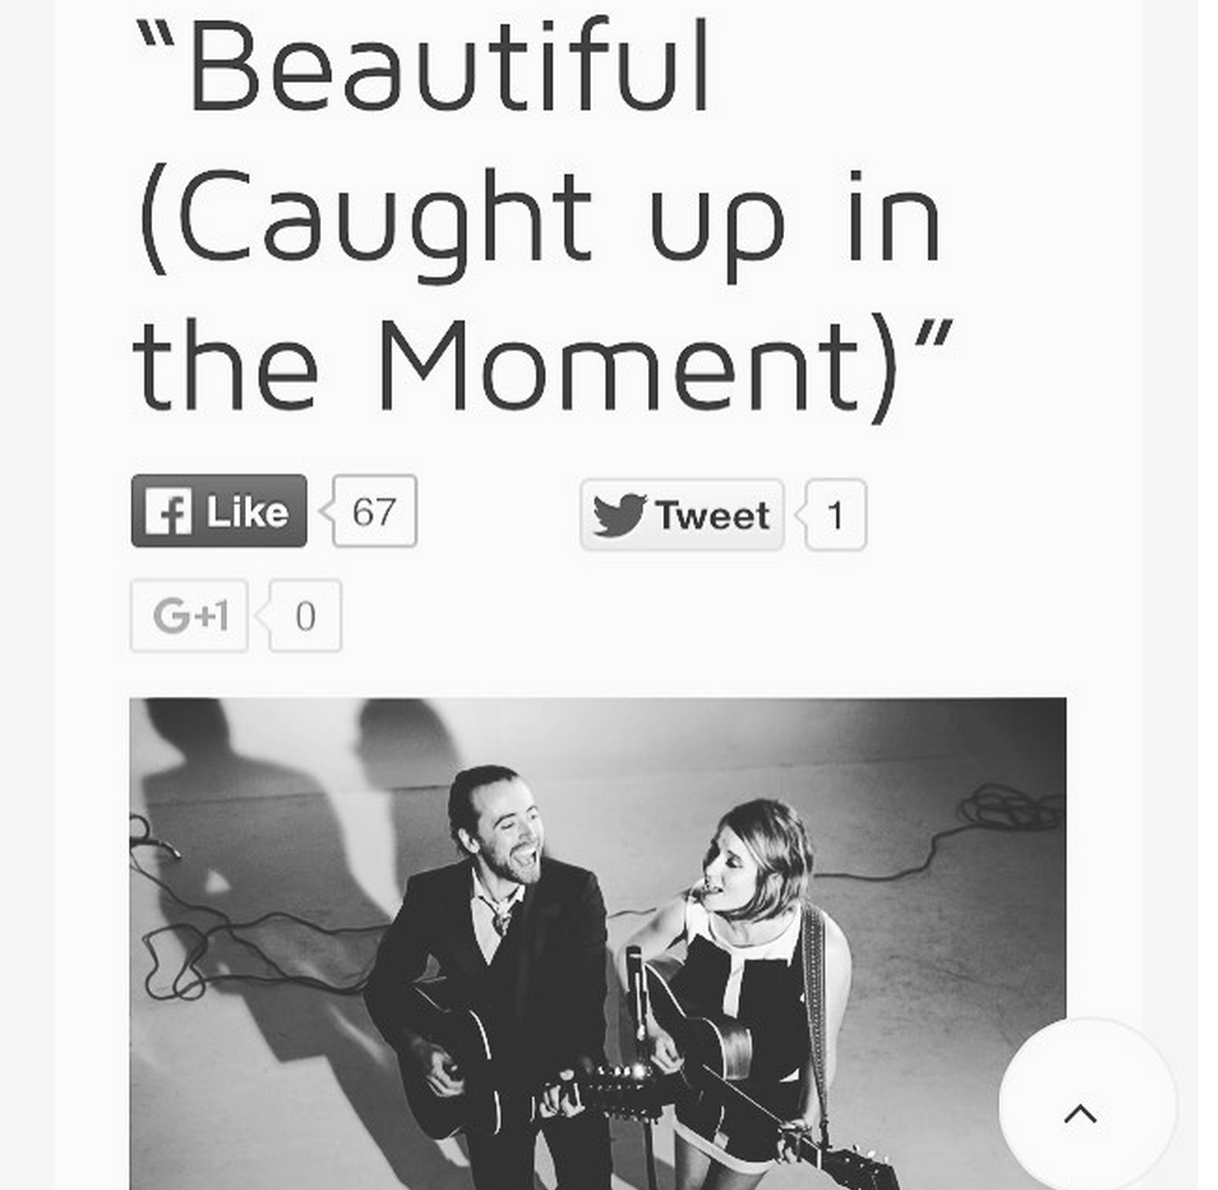 Groundsounds "Nashville folk-pop siblings Pageant premiere “Beautiful (Caught up in the Moment)” Sept 25, 2015